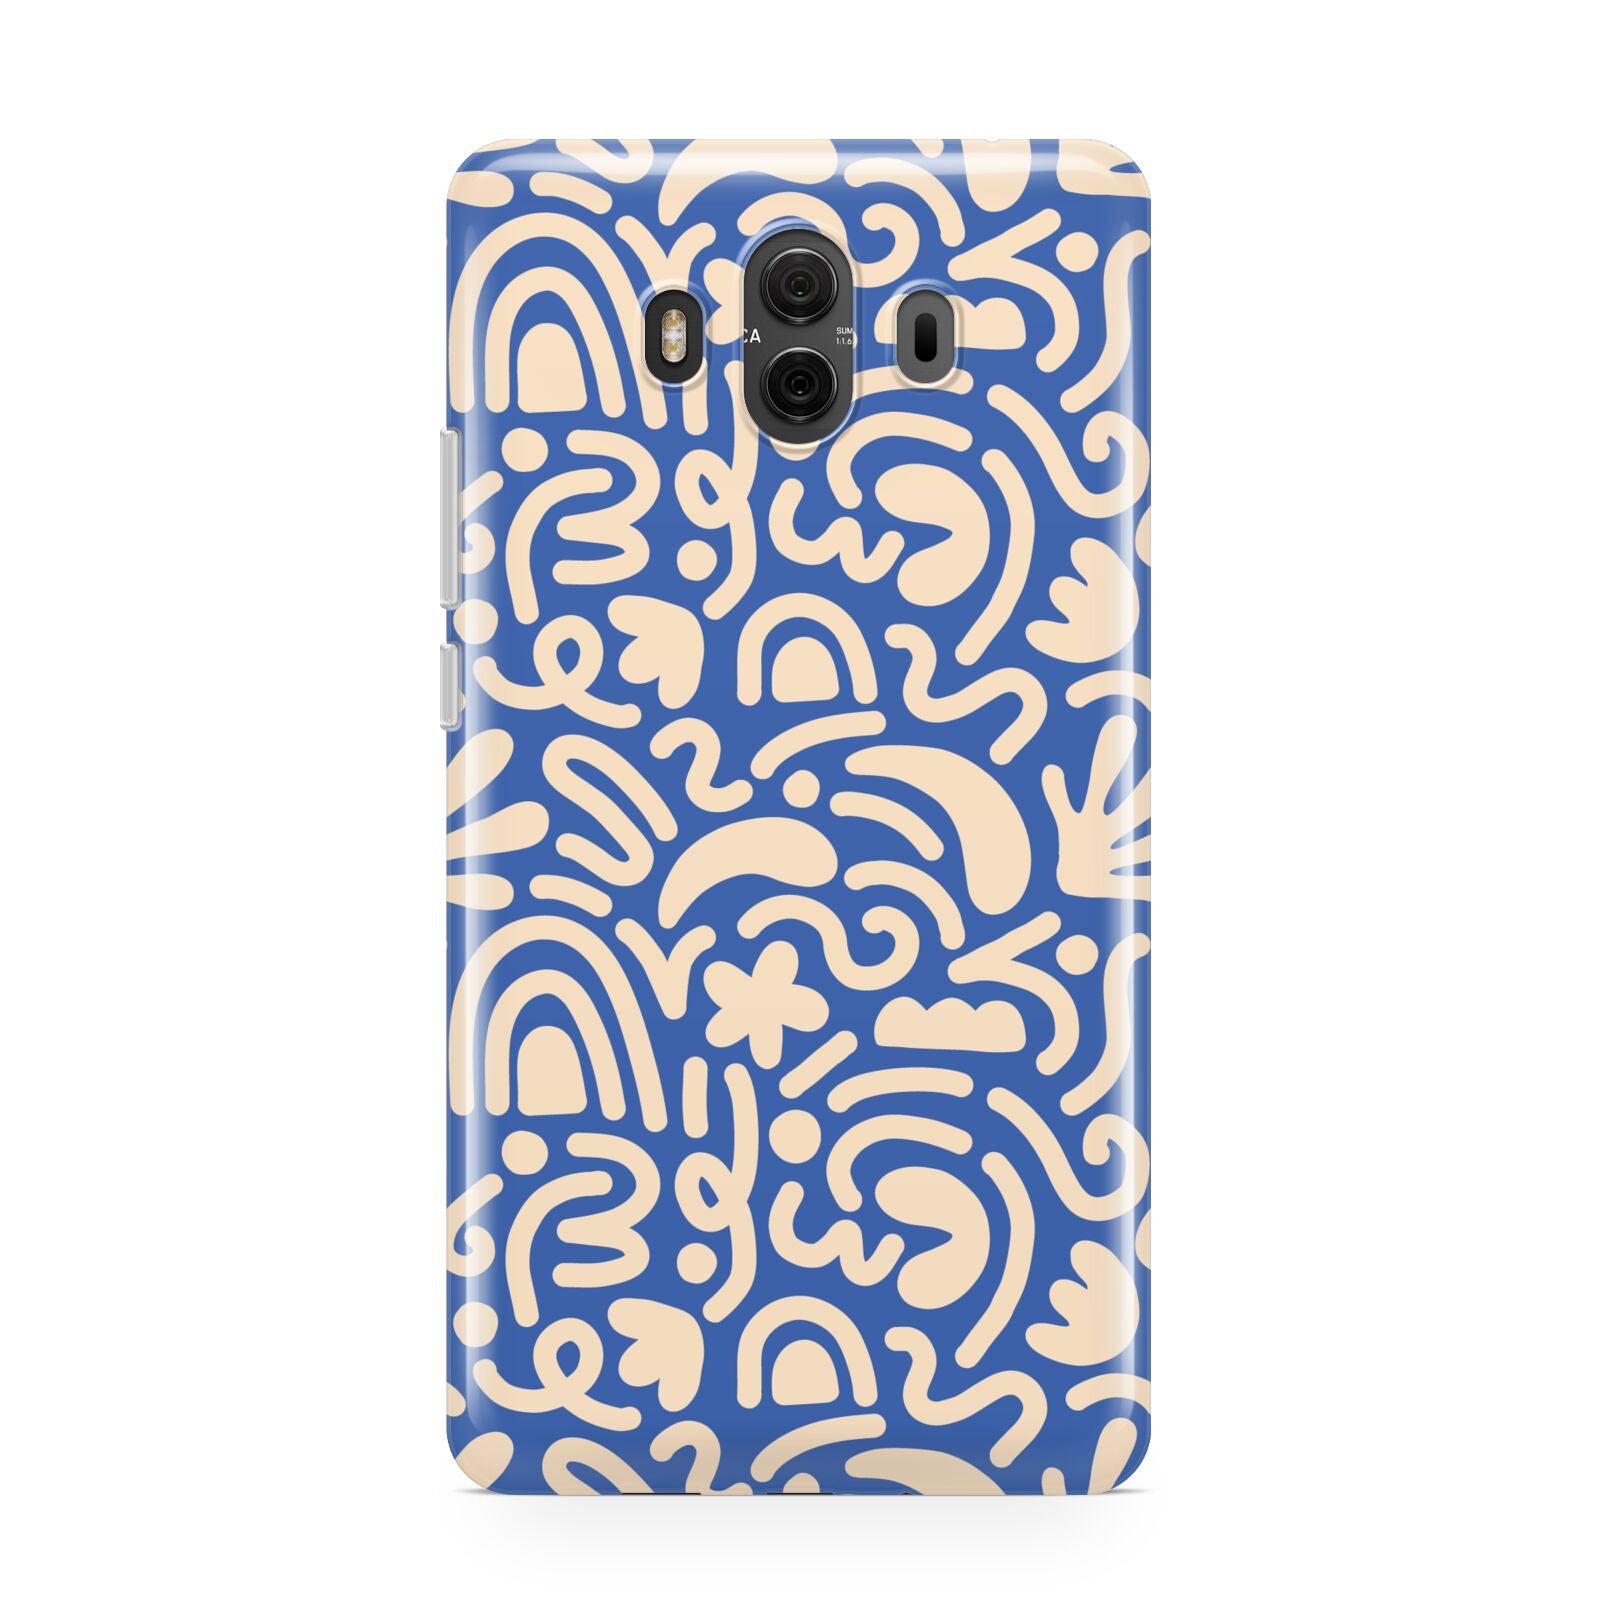 Abstract Huawei Mate 10 Protective Phone Case